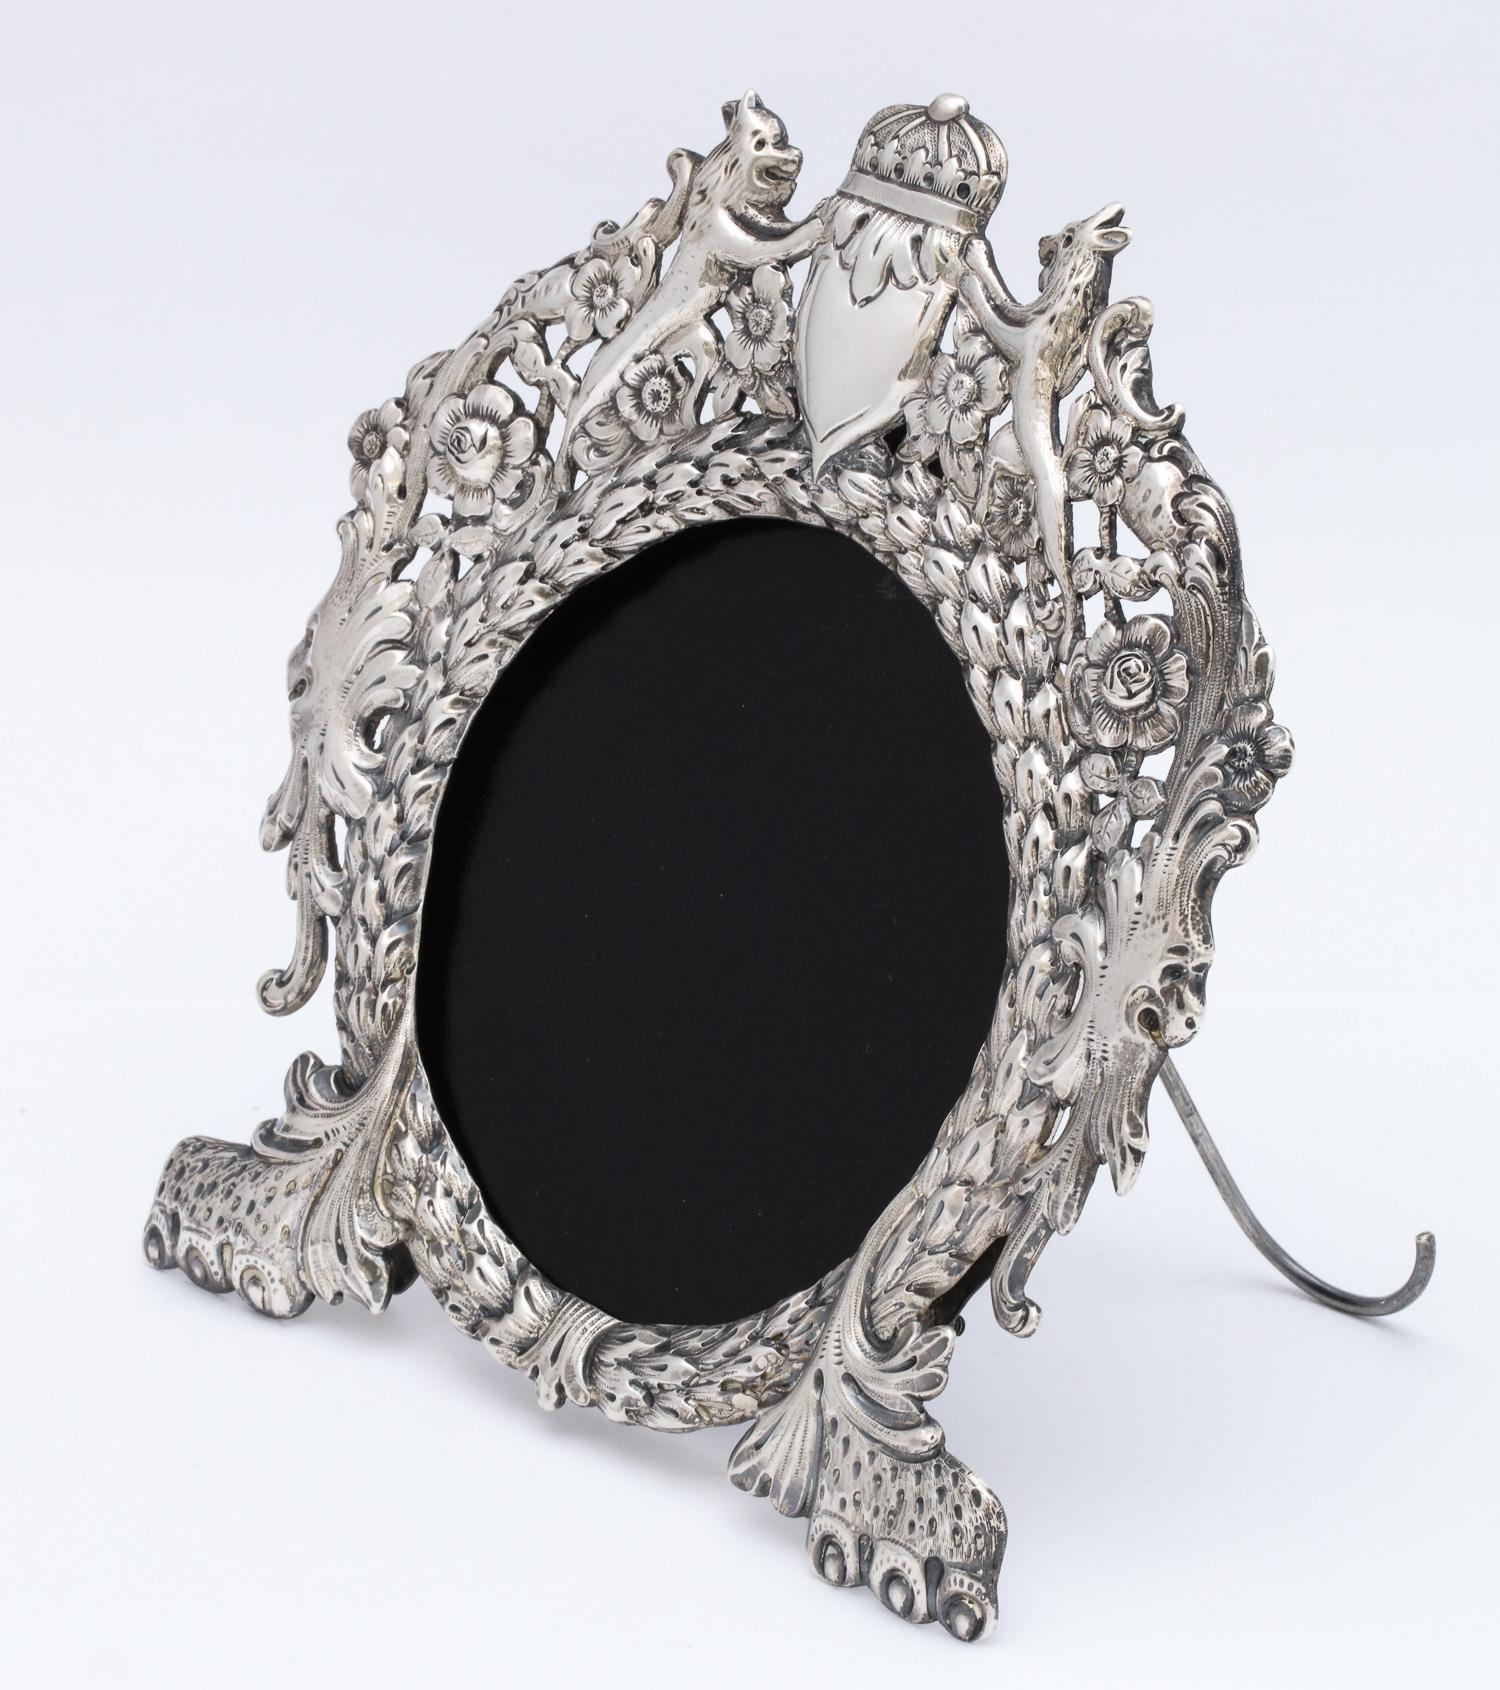 Unusual, Victorian, all sterling silver, lion's paw - footed picture frame decorated with mythological figures and having an all sterling silver easel. Made in New York by Udall and Ballou, circa 1900. Vacant cartouche. Frame has its original